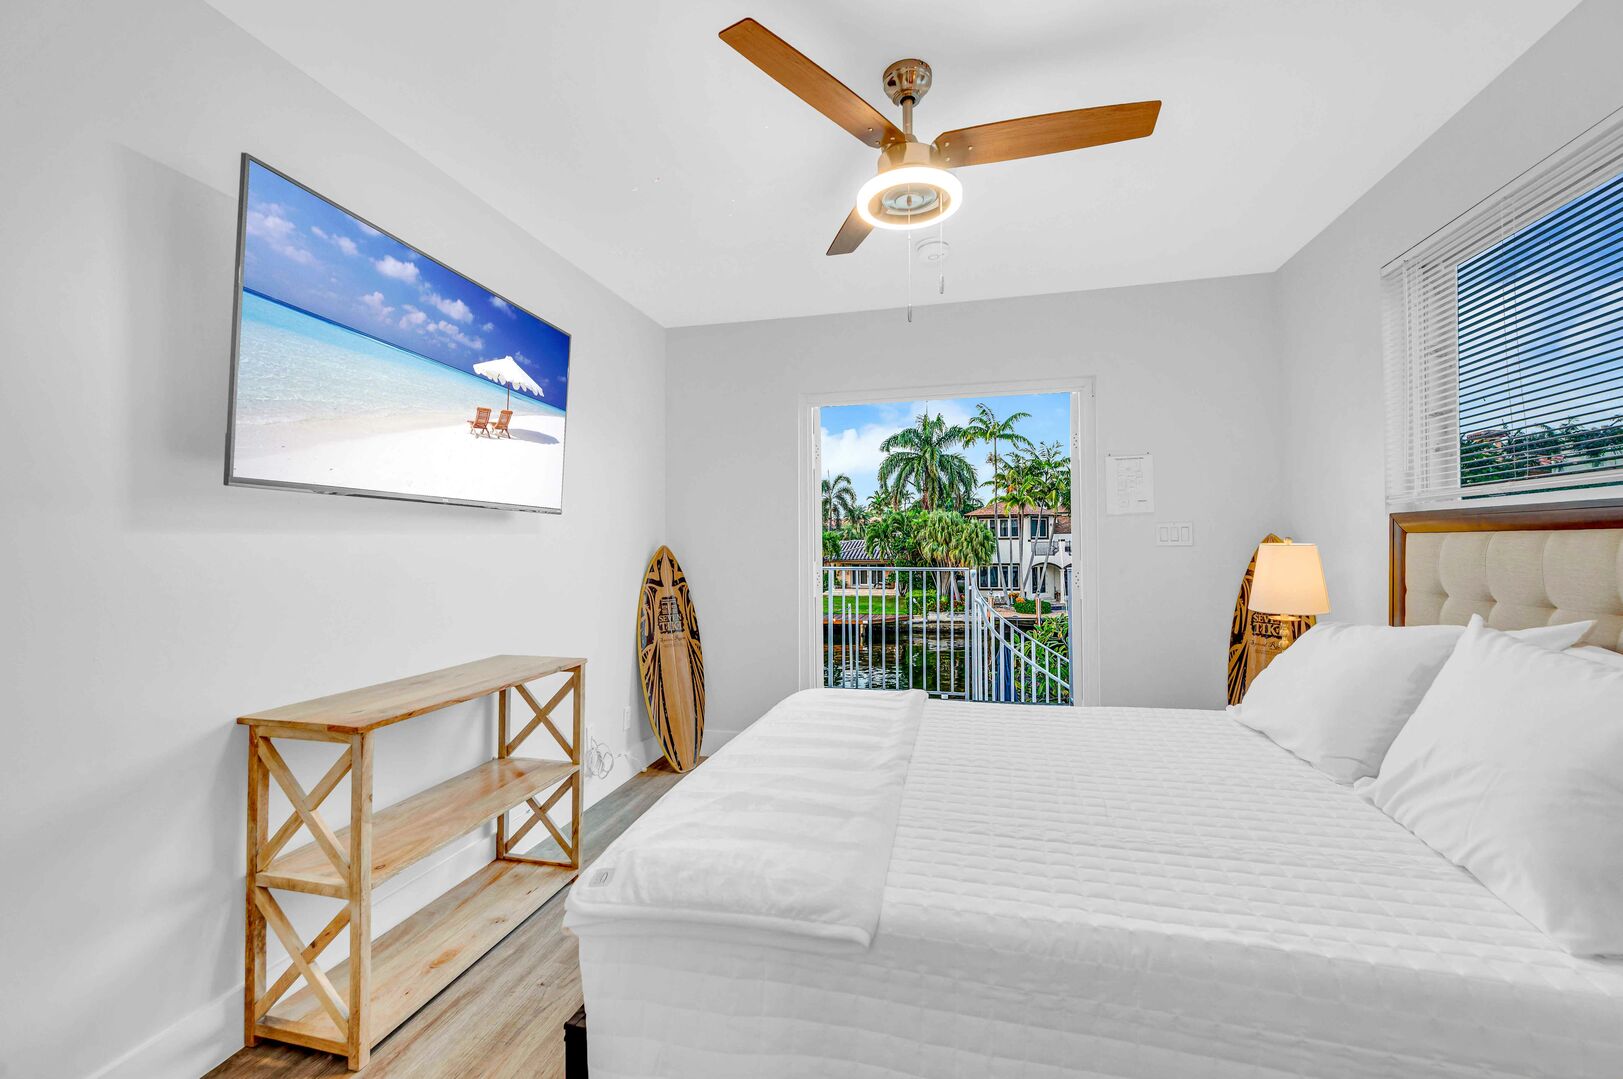 Bedroom five with its private entrance features a queen bed, smart TV, ensuite bathroom, and balcony access